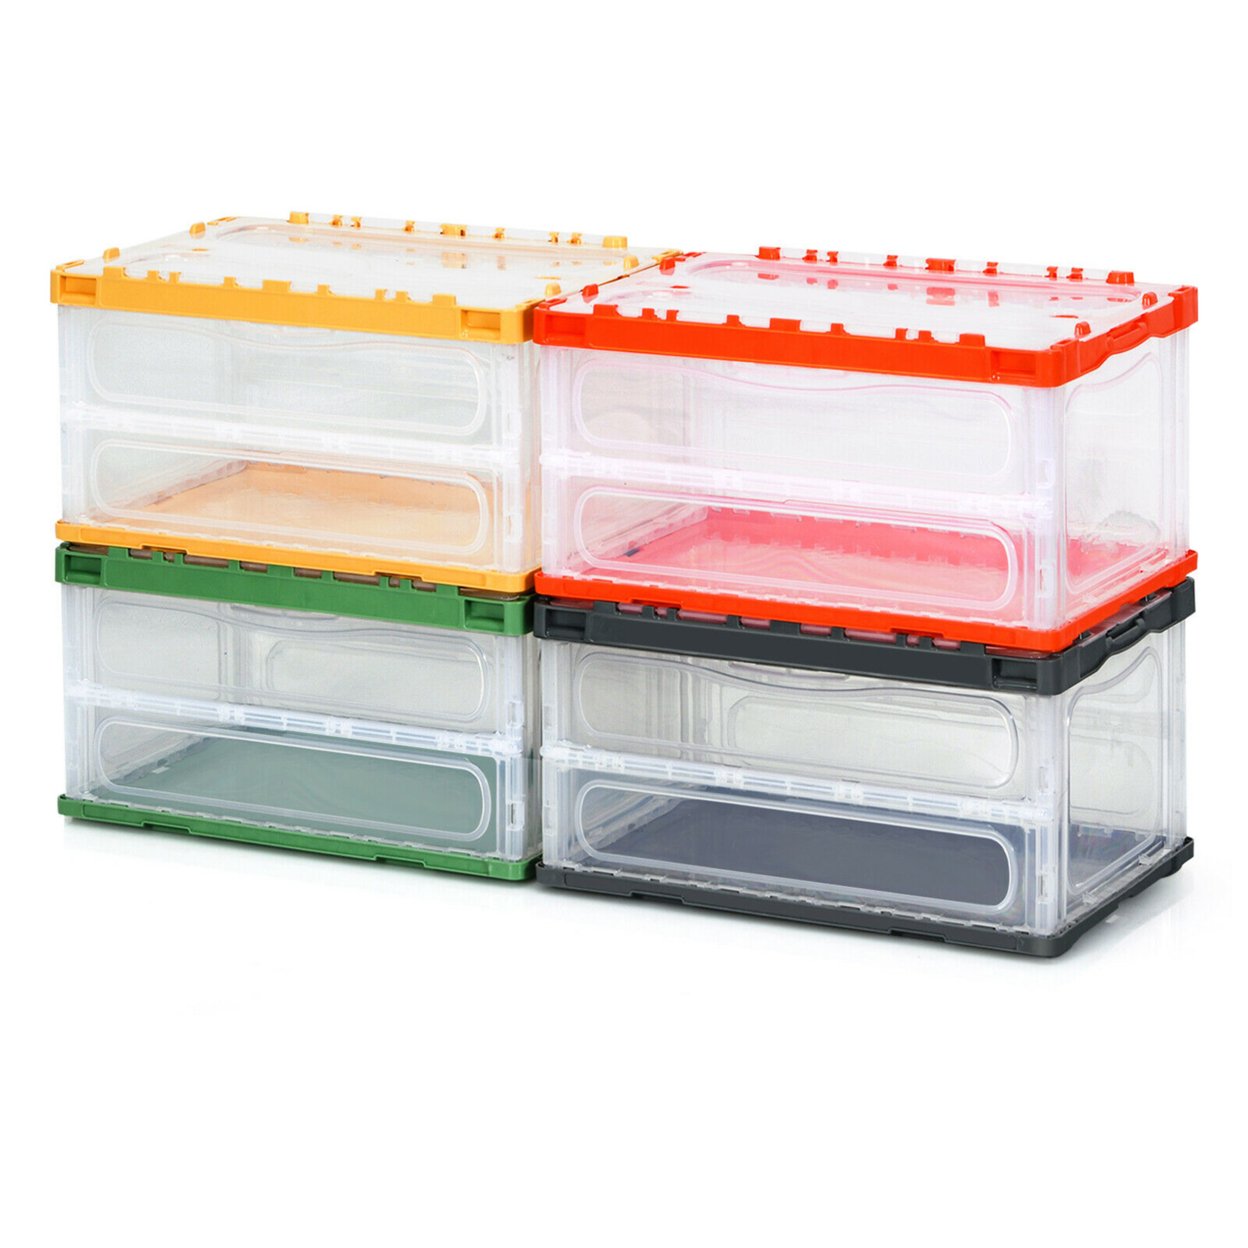 75L Collapsible Storage Bins Folding Plastic Stackable Utility Crates 4 Pack